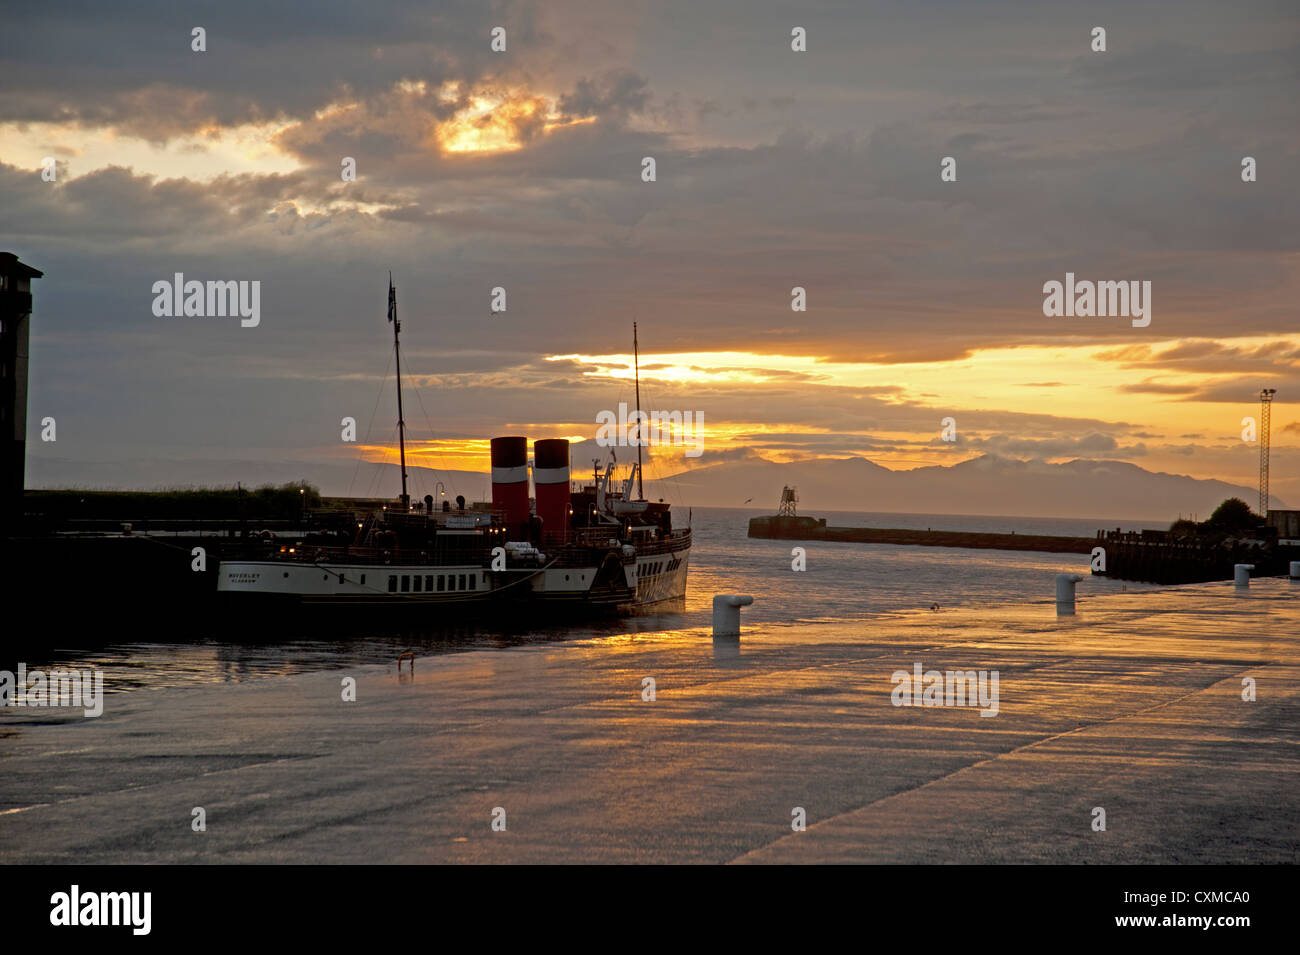 Sunset over Ayr harbour and the Waverly paddle steamer on the Firth of Clyde, Scotland.   SCO 8600 Stock Photo